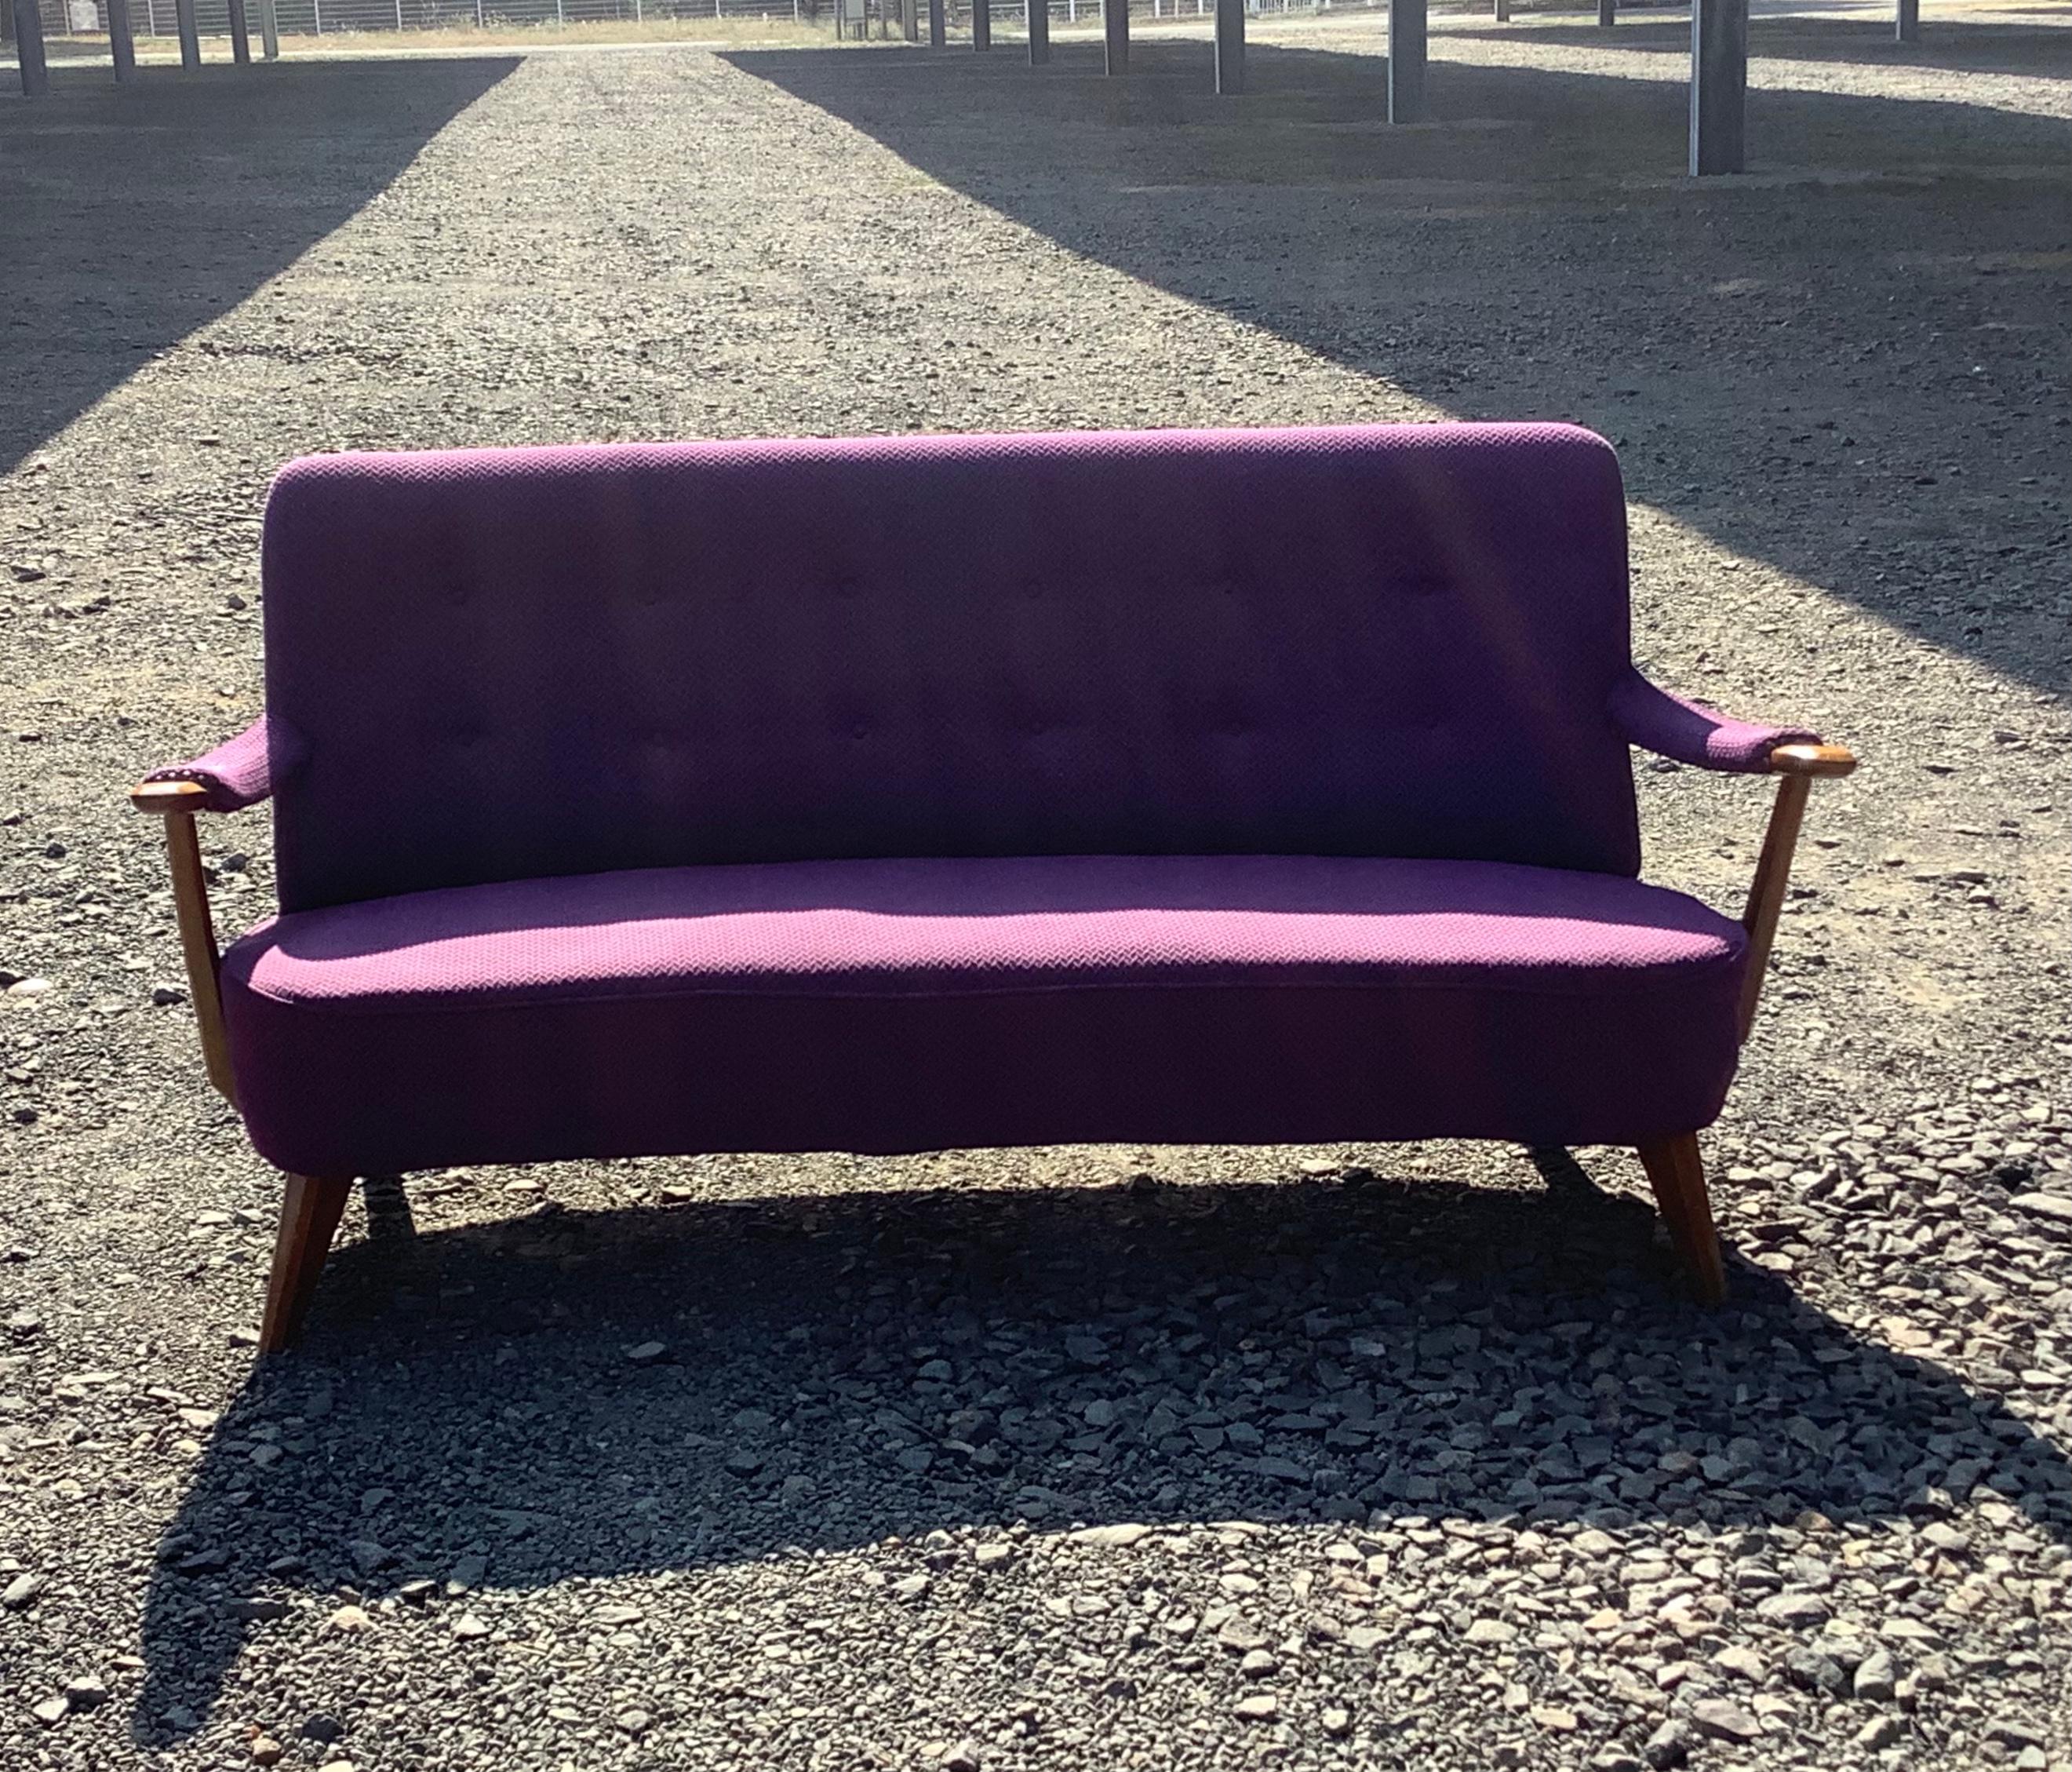 1950’s French 3 seater sofa with wooden arms deep purple upholstery. Bottom back high back design.